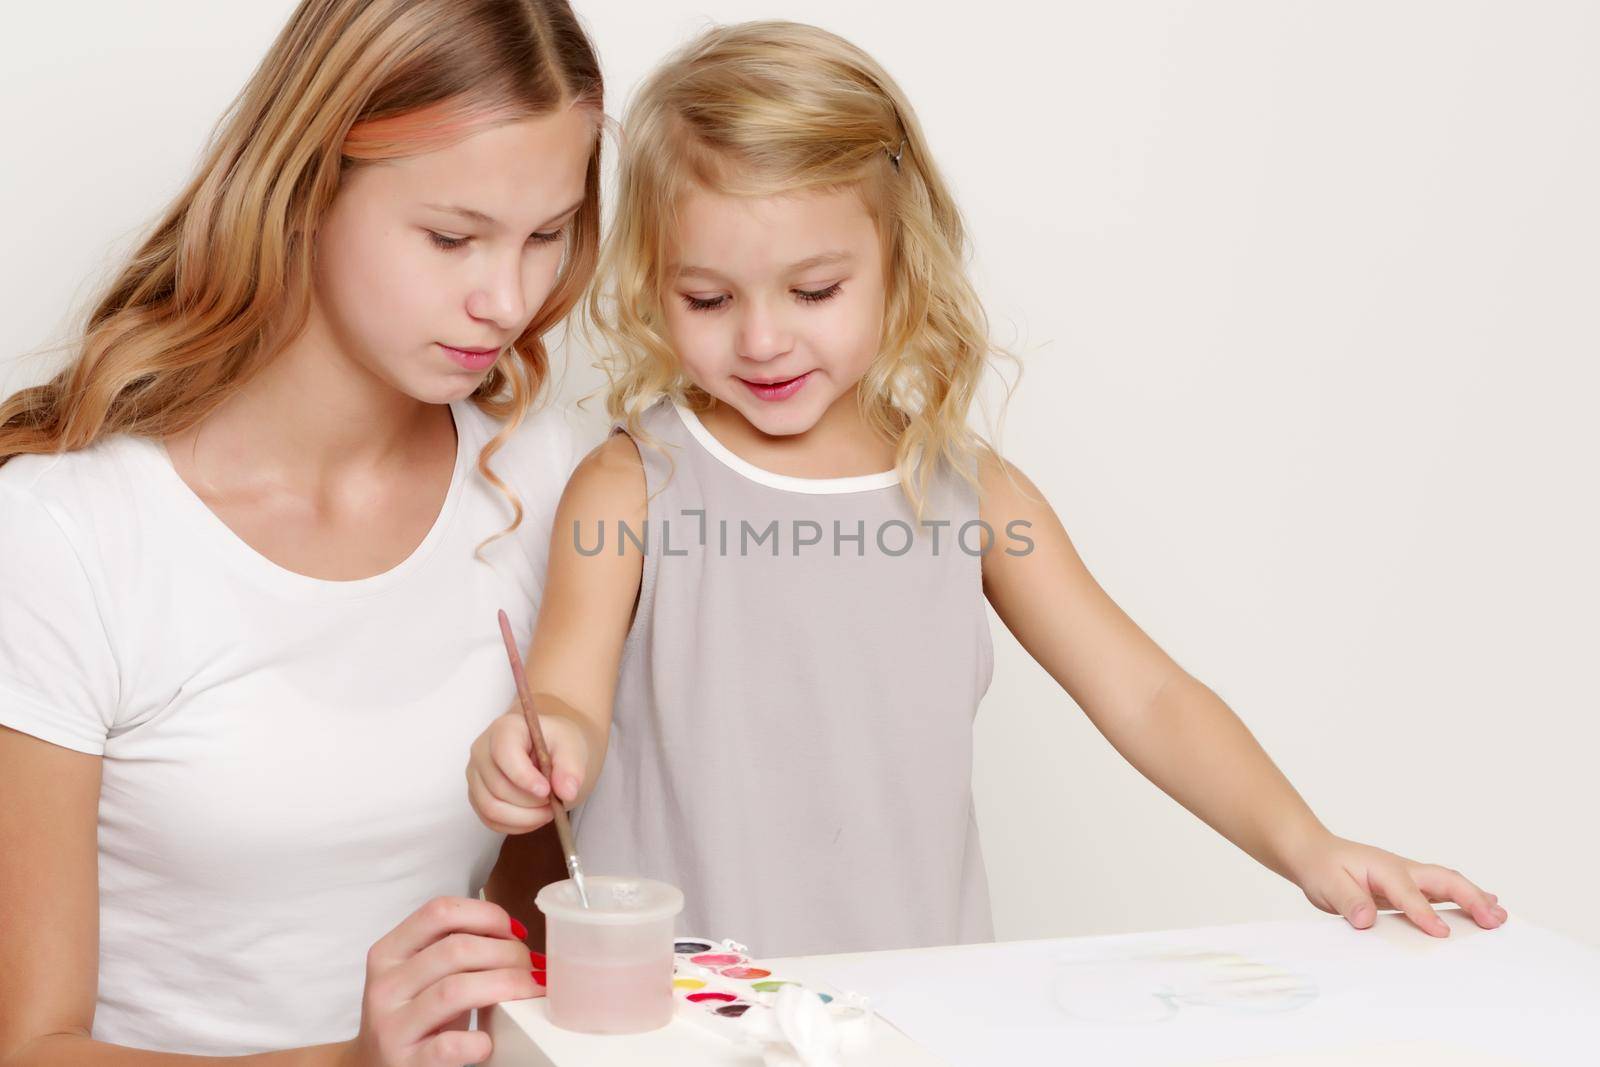 The older sister paints with the younger sister paints at the table on a piece of paper.